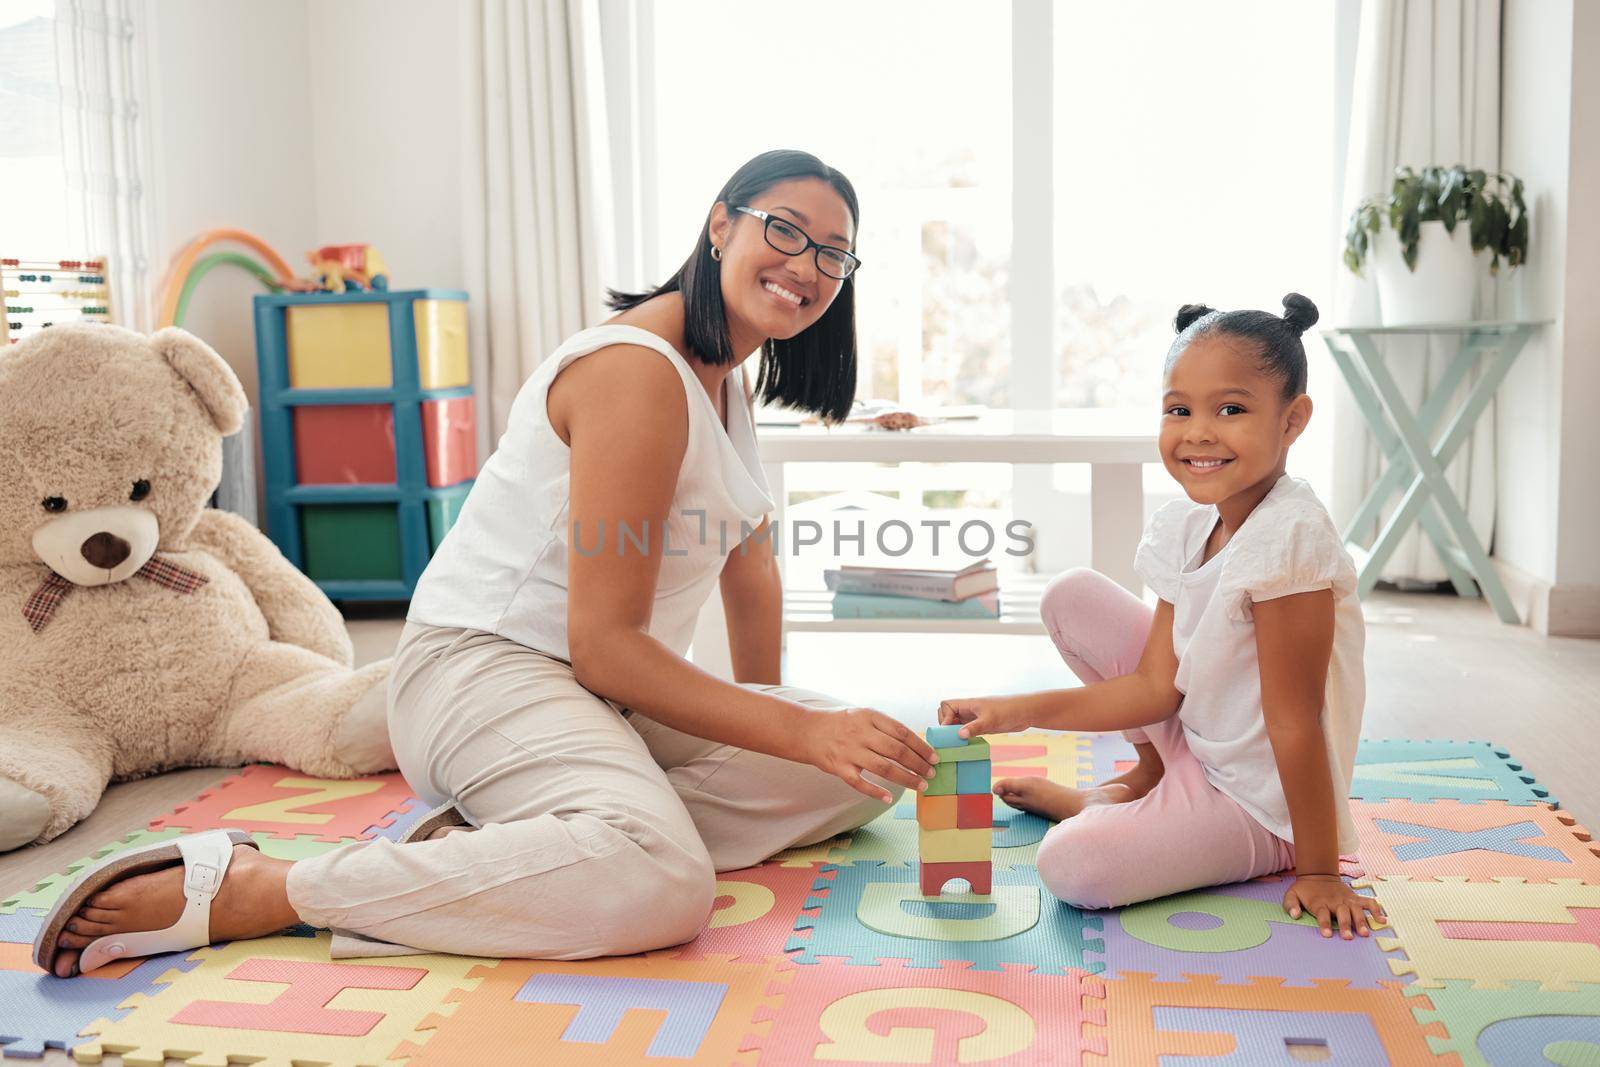 Mother, learning and child toy in home of knowledge development and education in a bedroom. Portrait of a happy family smile play a education game to build balance and children motor skills at home.